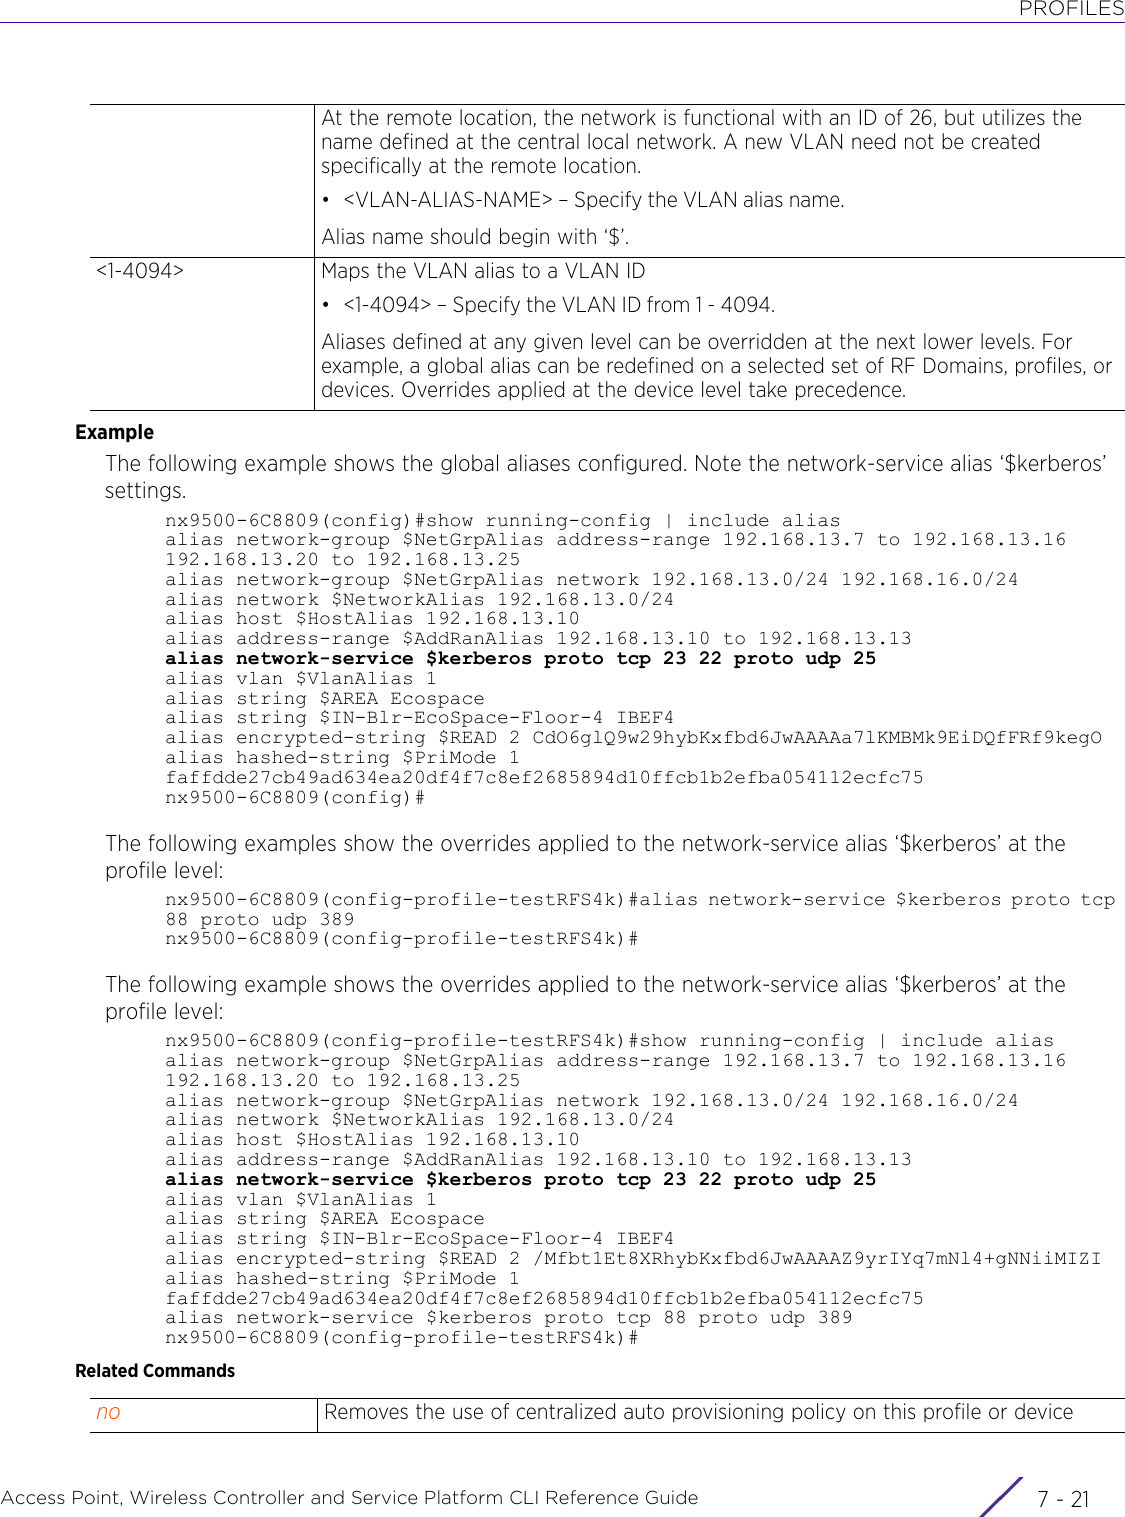 PROFILESAccess Point, Wireless Controller and Service Platform CLI Reference Guide 7 - 21ExampleThe following example shows the global aliases configured. Note the network-service alias ‘$kerberos’ settings.nx9500-6C8809(config)#show running-config | include aliasalias network-group $NetGrpAlias address-range 192.168.13.7 to 192.168.13.16 192.168.13.20 to 192.168.13.25alias network-group $NetGrpAlias network 192.168.13.0/24 192.168.16.0/24alias network $NetworkAlias 192.168.13.0/24alias host $HostAlias 192.168.13.10alias address-range $AddRanAlias 192.168.13.10 to 192.168.13.13alias network-service $kerberos proto tcp 23 22 proto udp 25alias vlan $VlanAlias 1alias string $AREA Ecospacealias string $IN-Blr-EcoSpace-Floor-4 IBEF4alias encrypted-string $READ 2 CdO6glQ9w29hybKxfbd6JwAAAAa7lKMBMk9EiDQfFRf9kegOalias hashed-string $PriMode 1 faffdde27cb49ad634ea20df4f7c8ef2685894d10ffcb1b2efba054112ecfc75nx9500-6C8809(config)#The following examples show the overrides applied to the network-service alias ‘$kerberos’ at the profile level:nx9500-6C8809(config-profile-testRFS4k)#alias network-service $kerberos proto tcp 88 proto udp 389nx9500-6C8809(config-profile-testRFS4k)#The following example shows the overrides applied to the network-service alias ‘$kerberos’ at the profile level:nx9500-6C8809(config-profile-testRFS4k)#show running-config | include aliasalias network-group $NetGrpAlias address-range 192.168.13.7 to 192.168.13.16 192.168.13.20 to 192.168.13.25alias network-group $NetGrpAlias network 192.168.13.0/24 192.168.16.0/24alias network $NetworkAlias 192.168.13.0/24alias host $HostAlias 192.168.13.10alias address-range $AddRanAlias 192.168.13.10 to 192.168.13.13alias network-service $kerberos proto tcp 23 22 proto udp 25alias vlan $VlanAlias 1alias string $AREA Ecospacealias string $IN-Blr-EcoSpace-Floor-4 IBEF4alias encrypted-string $READ 2 /Mfbt1Et8XRhybKxfbd6JwAAAAZ9yrIYq7mNl4+gNNiiMIZIalias hashed-string $PriMode 1 faffdde27cb49ad634ea20df4f7c8ef2685894d10ffcb1b2efba054112ecfc75alias network-service $kerberos proto tcp 88 proto udp 389nx9500-6C8809(config-profile-testRFS4k)#Related CommandsAt the remote location, the network is functional with an ID of 26, but utilizes the name defined at the central local network. A new VLAN need not be created specifically at the remote location.• &lt;VLAN-ALIAS-NAME&gt; – Specify the VLAN alias name.Alias name should begin with ‘$’.&lt;1-4094&gt; Maps the VLAN alias to a VLAN ID• &lt;1-4094&gt; – Specify the VLAN ID from 1 - 4094.Aliases defined at any given level can be overridden at the next lower levels. For example, a global alias can be redefined on a selected set of RF Domains, profiles, or devices. Overrides applied at the device level take precedence.no Removes the use of centralized auto provisioning policy on this profile or device